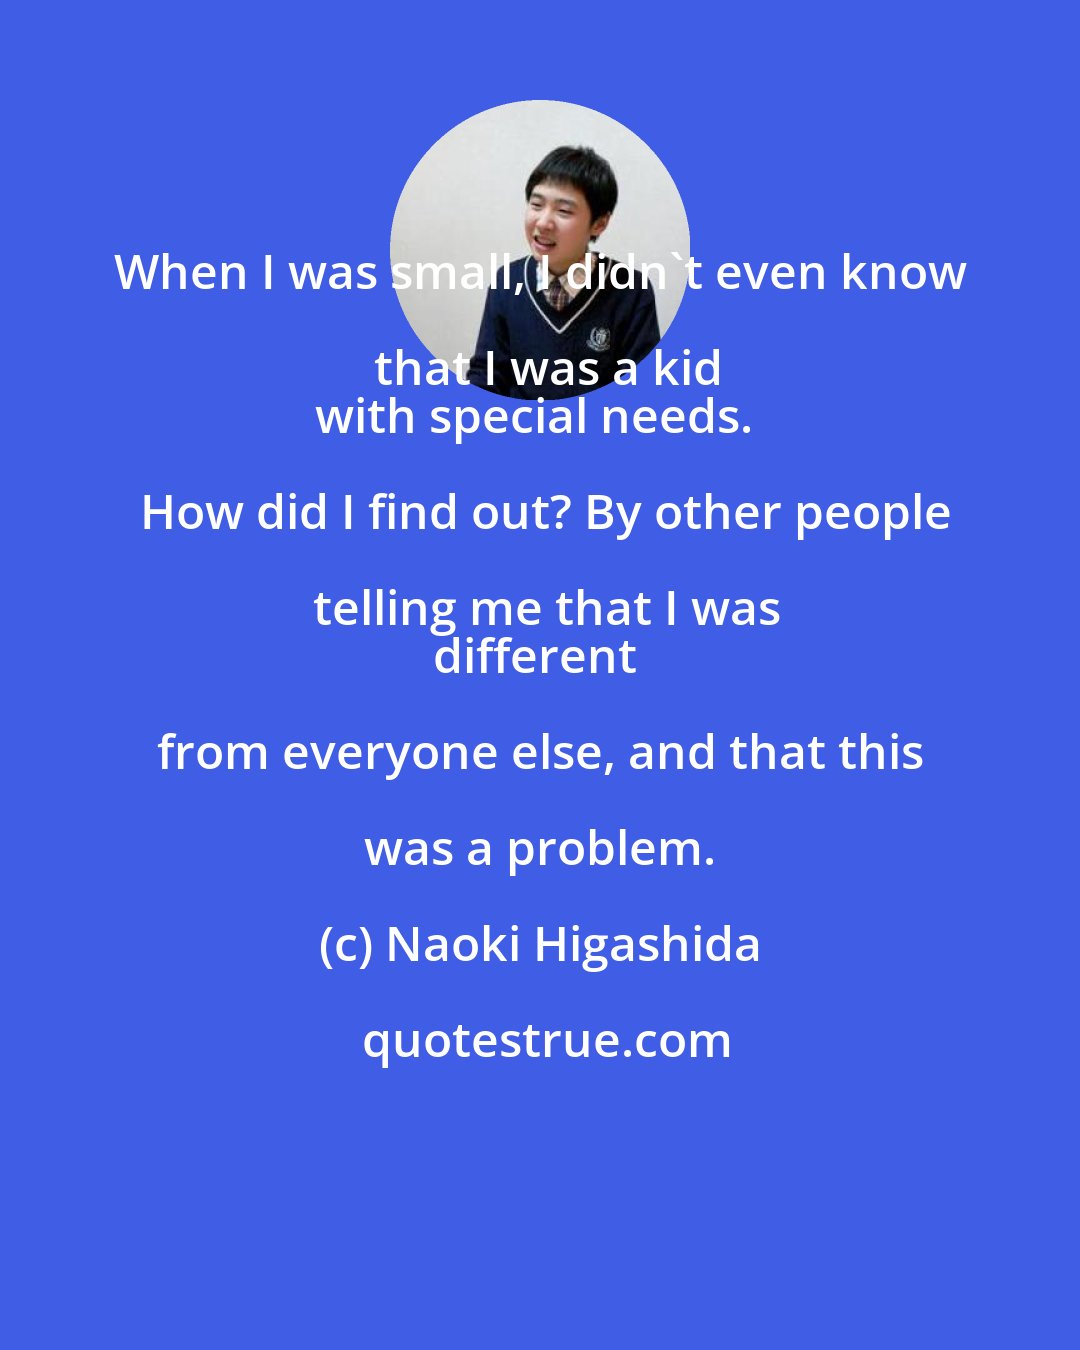 Naoki Higashida: When I was small, I didn't even know that I was a kid
with special needs.  How did I find out? By other people telling me that I was
different from everyone else, and that this was a problem.